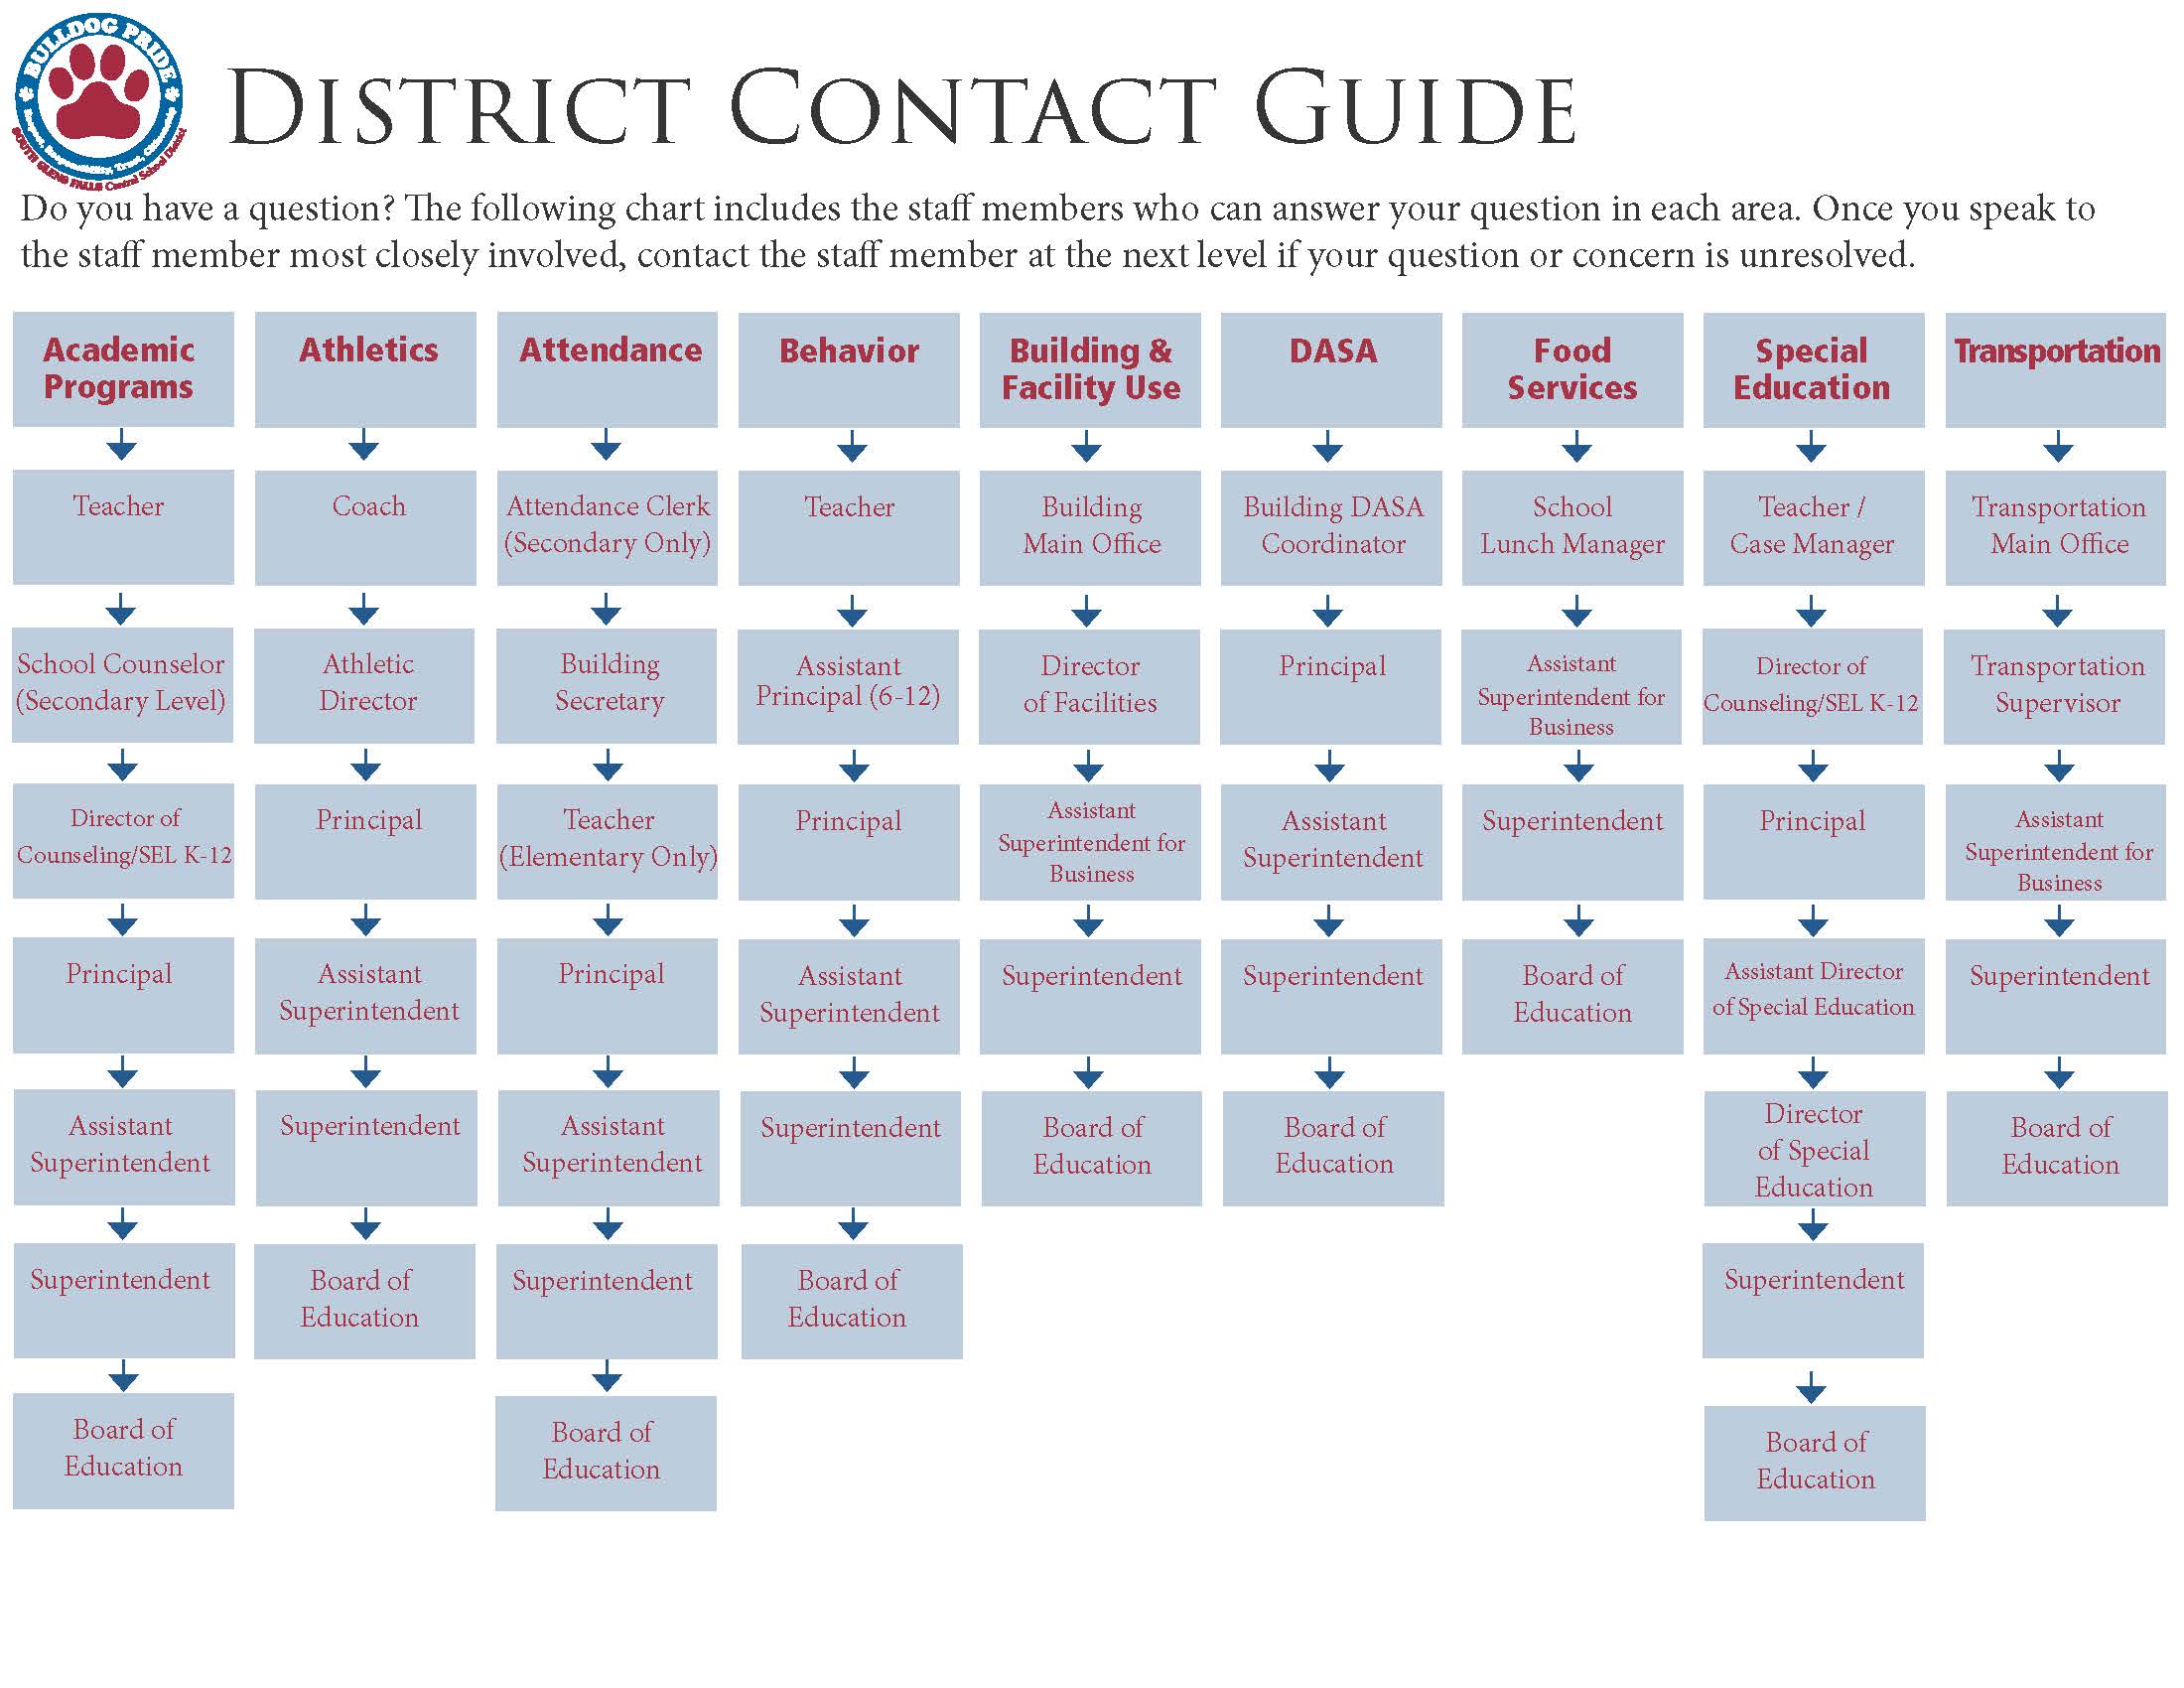 District Contact Guide flowchart